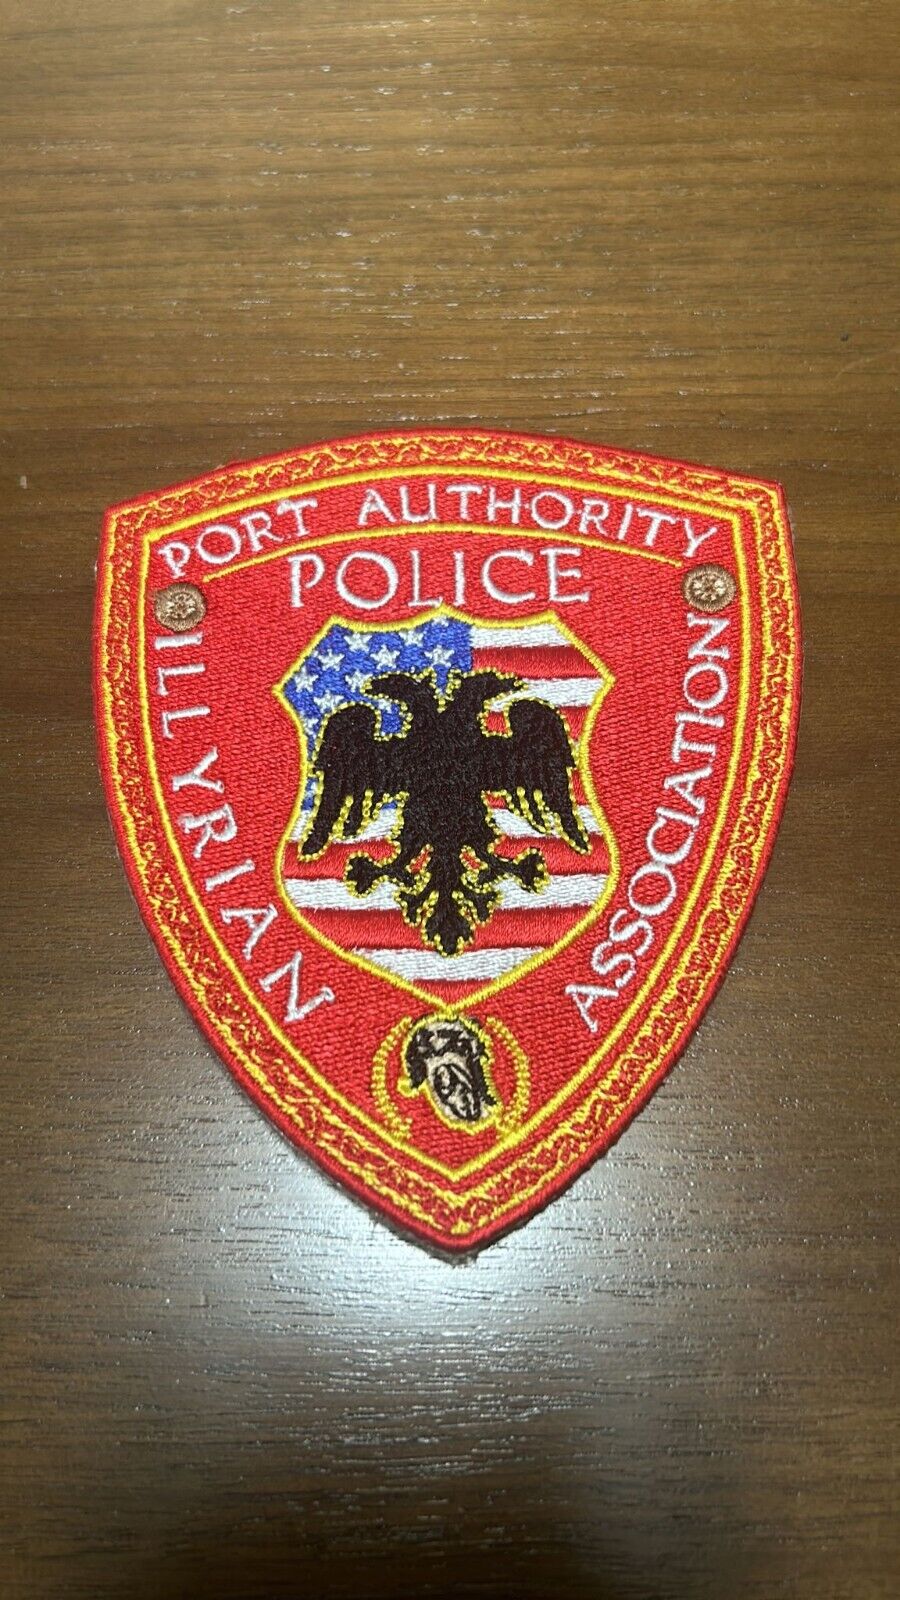 Port Authority Police Department Of NY & NJ ILLYRIAN ASSOCIATION Patch